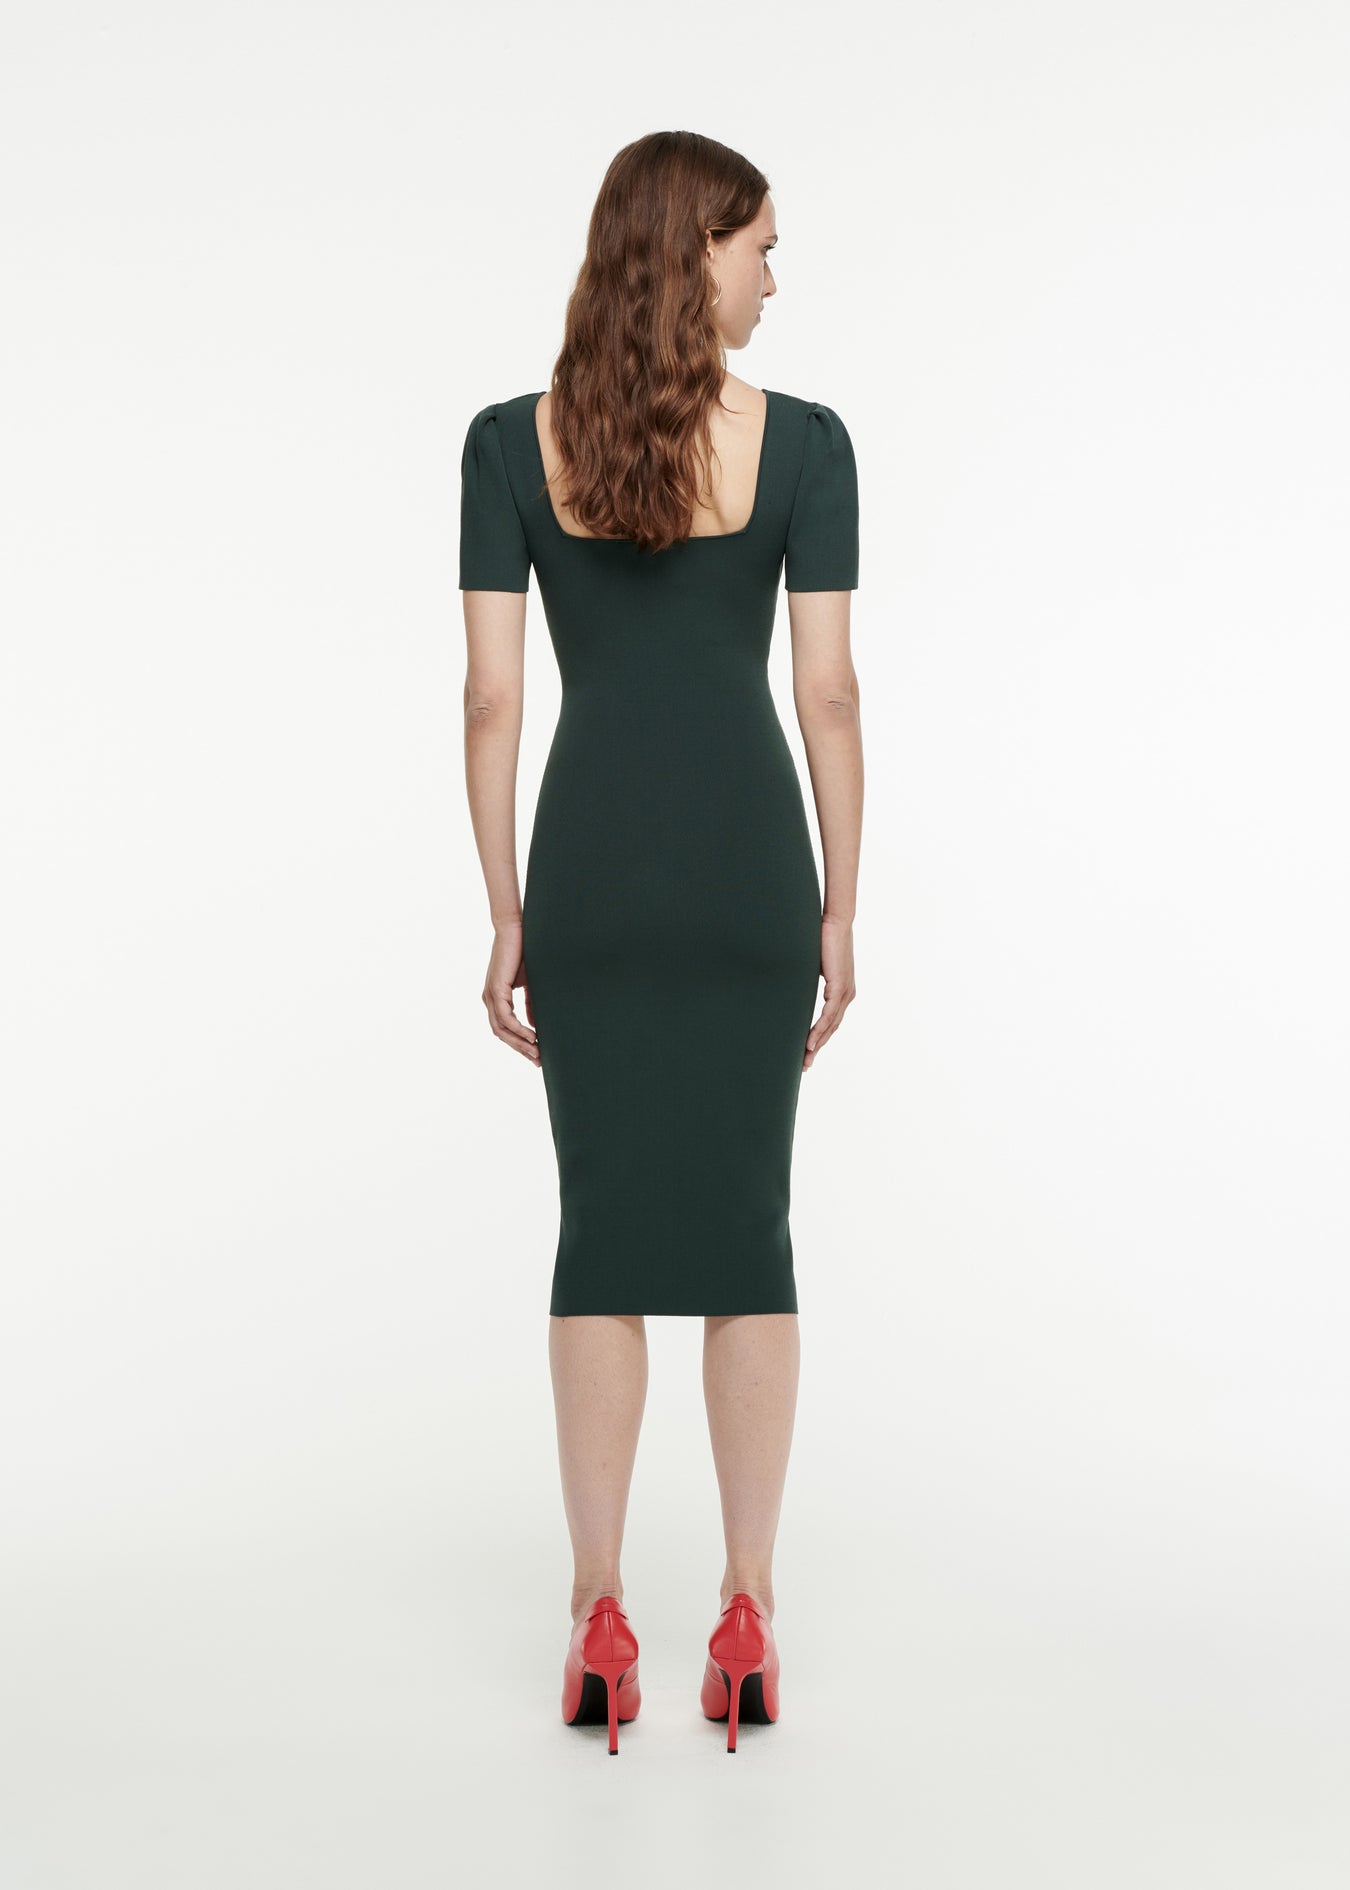 The back of a woman wearing the Short Sleeve Knit Midi Dress in Dark Green